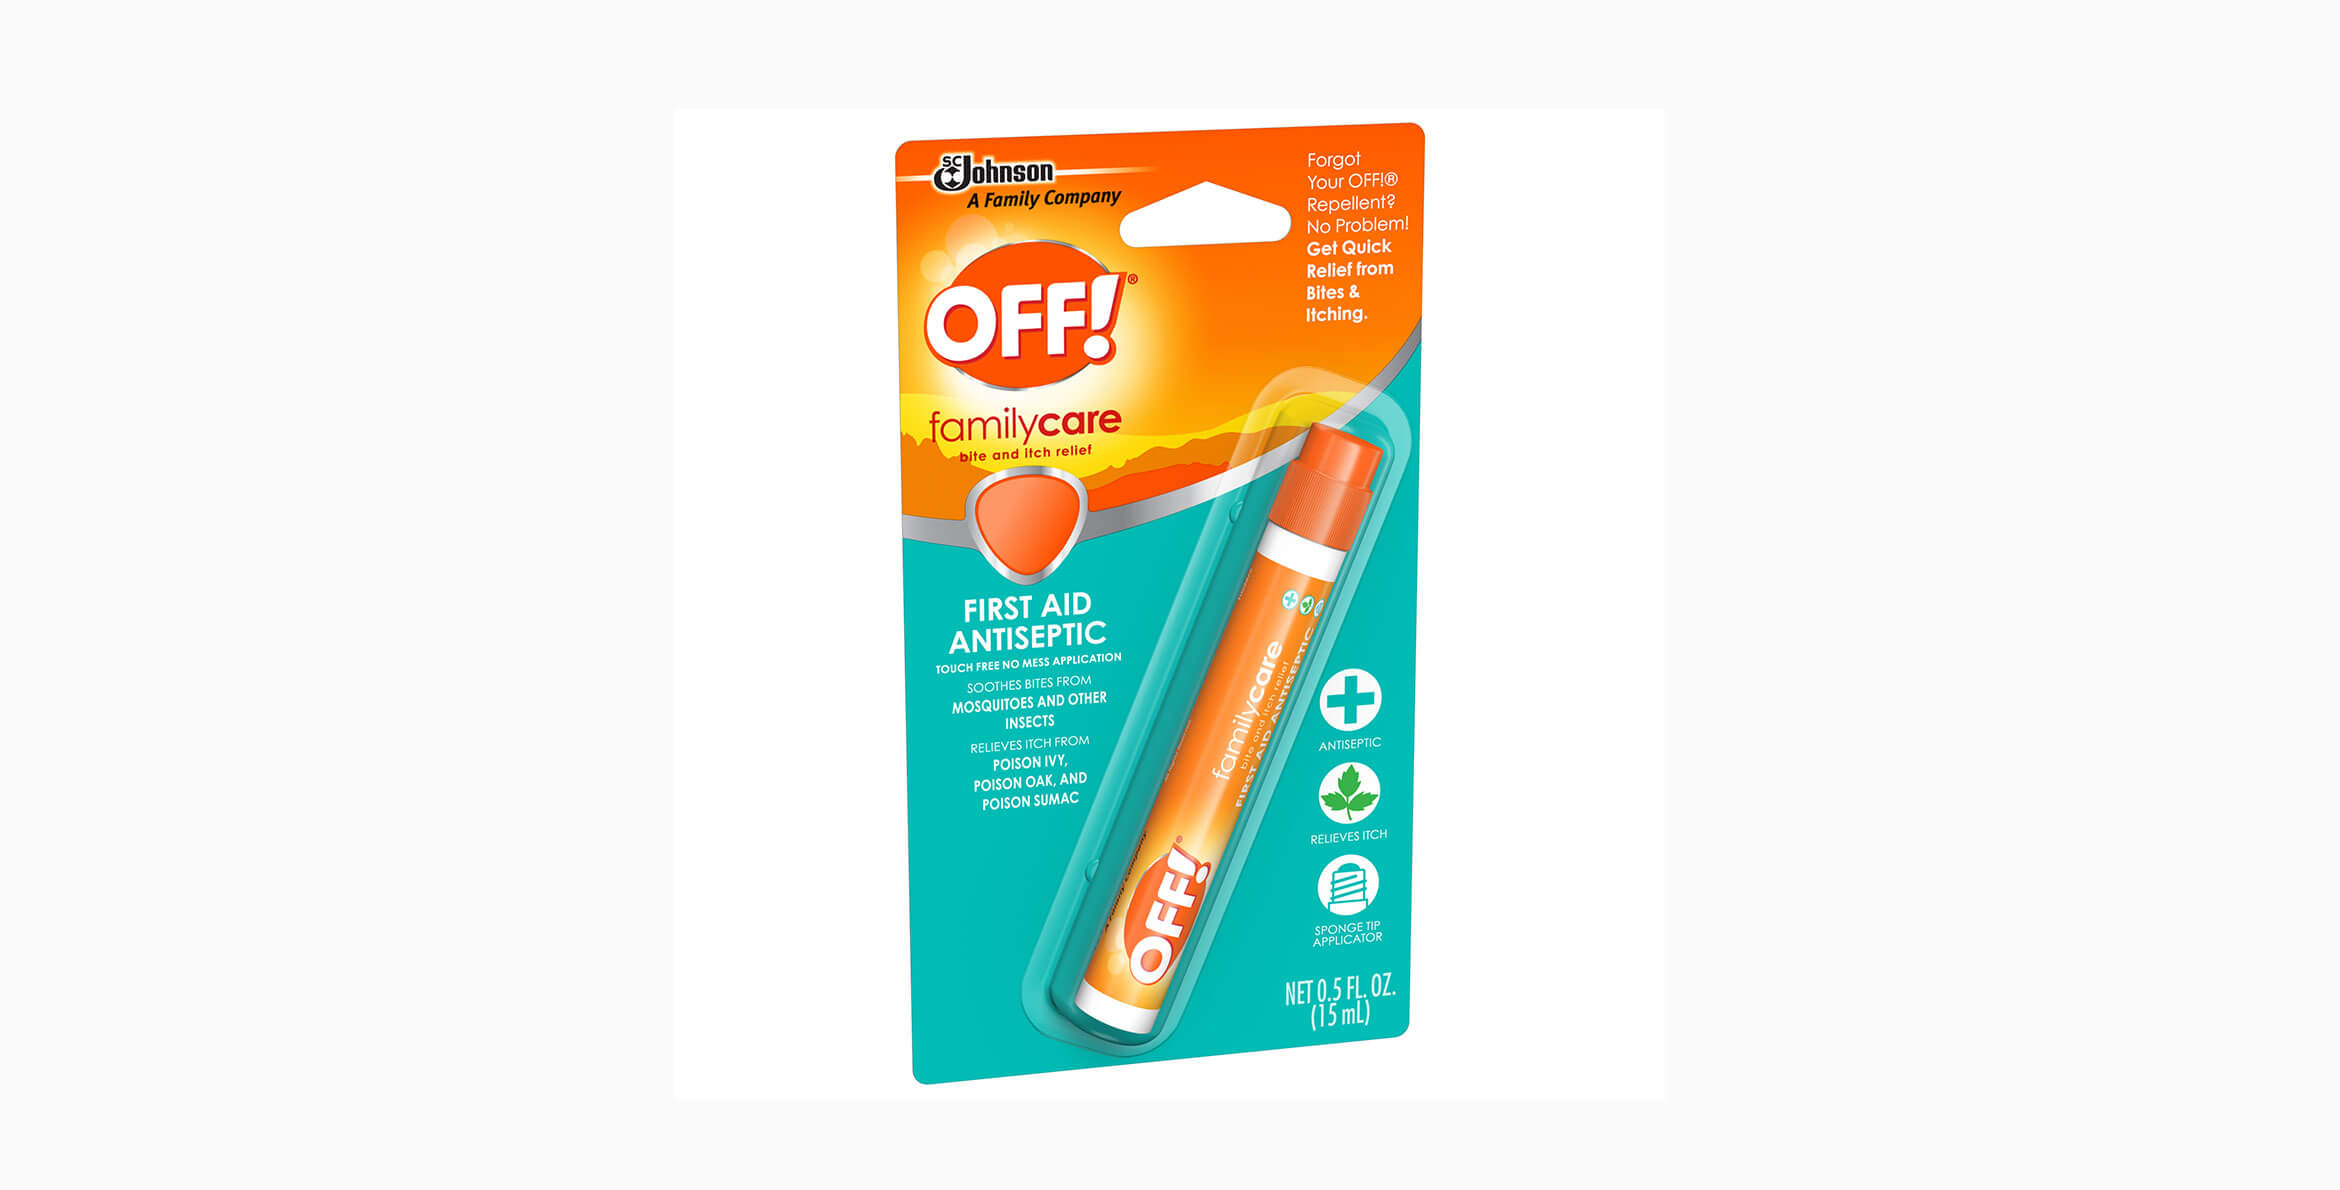 OFF!® FamilyCare Bite and Itch Relief 